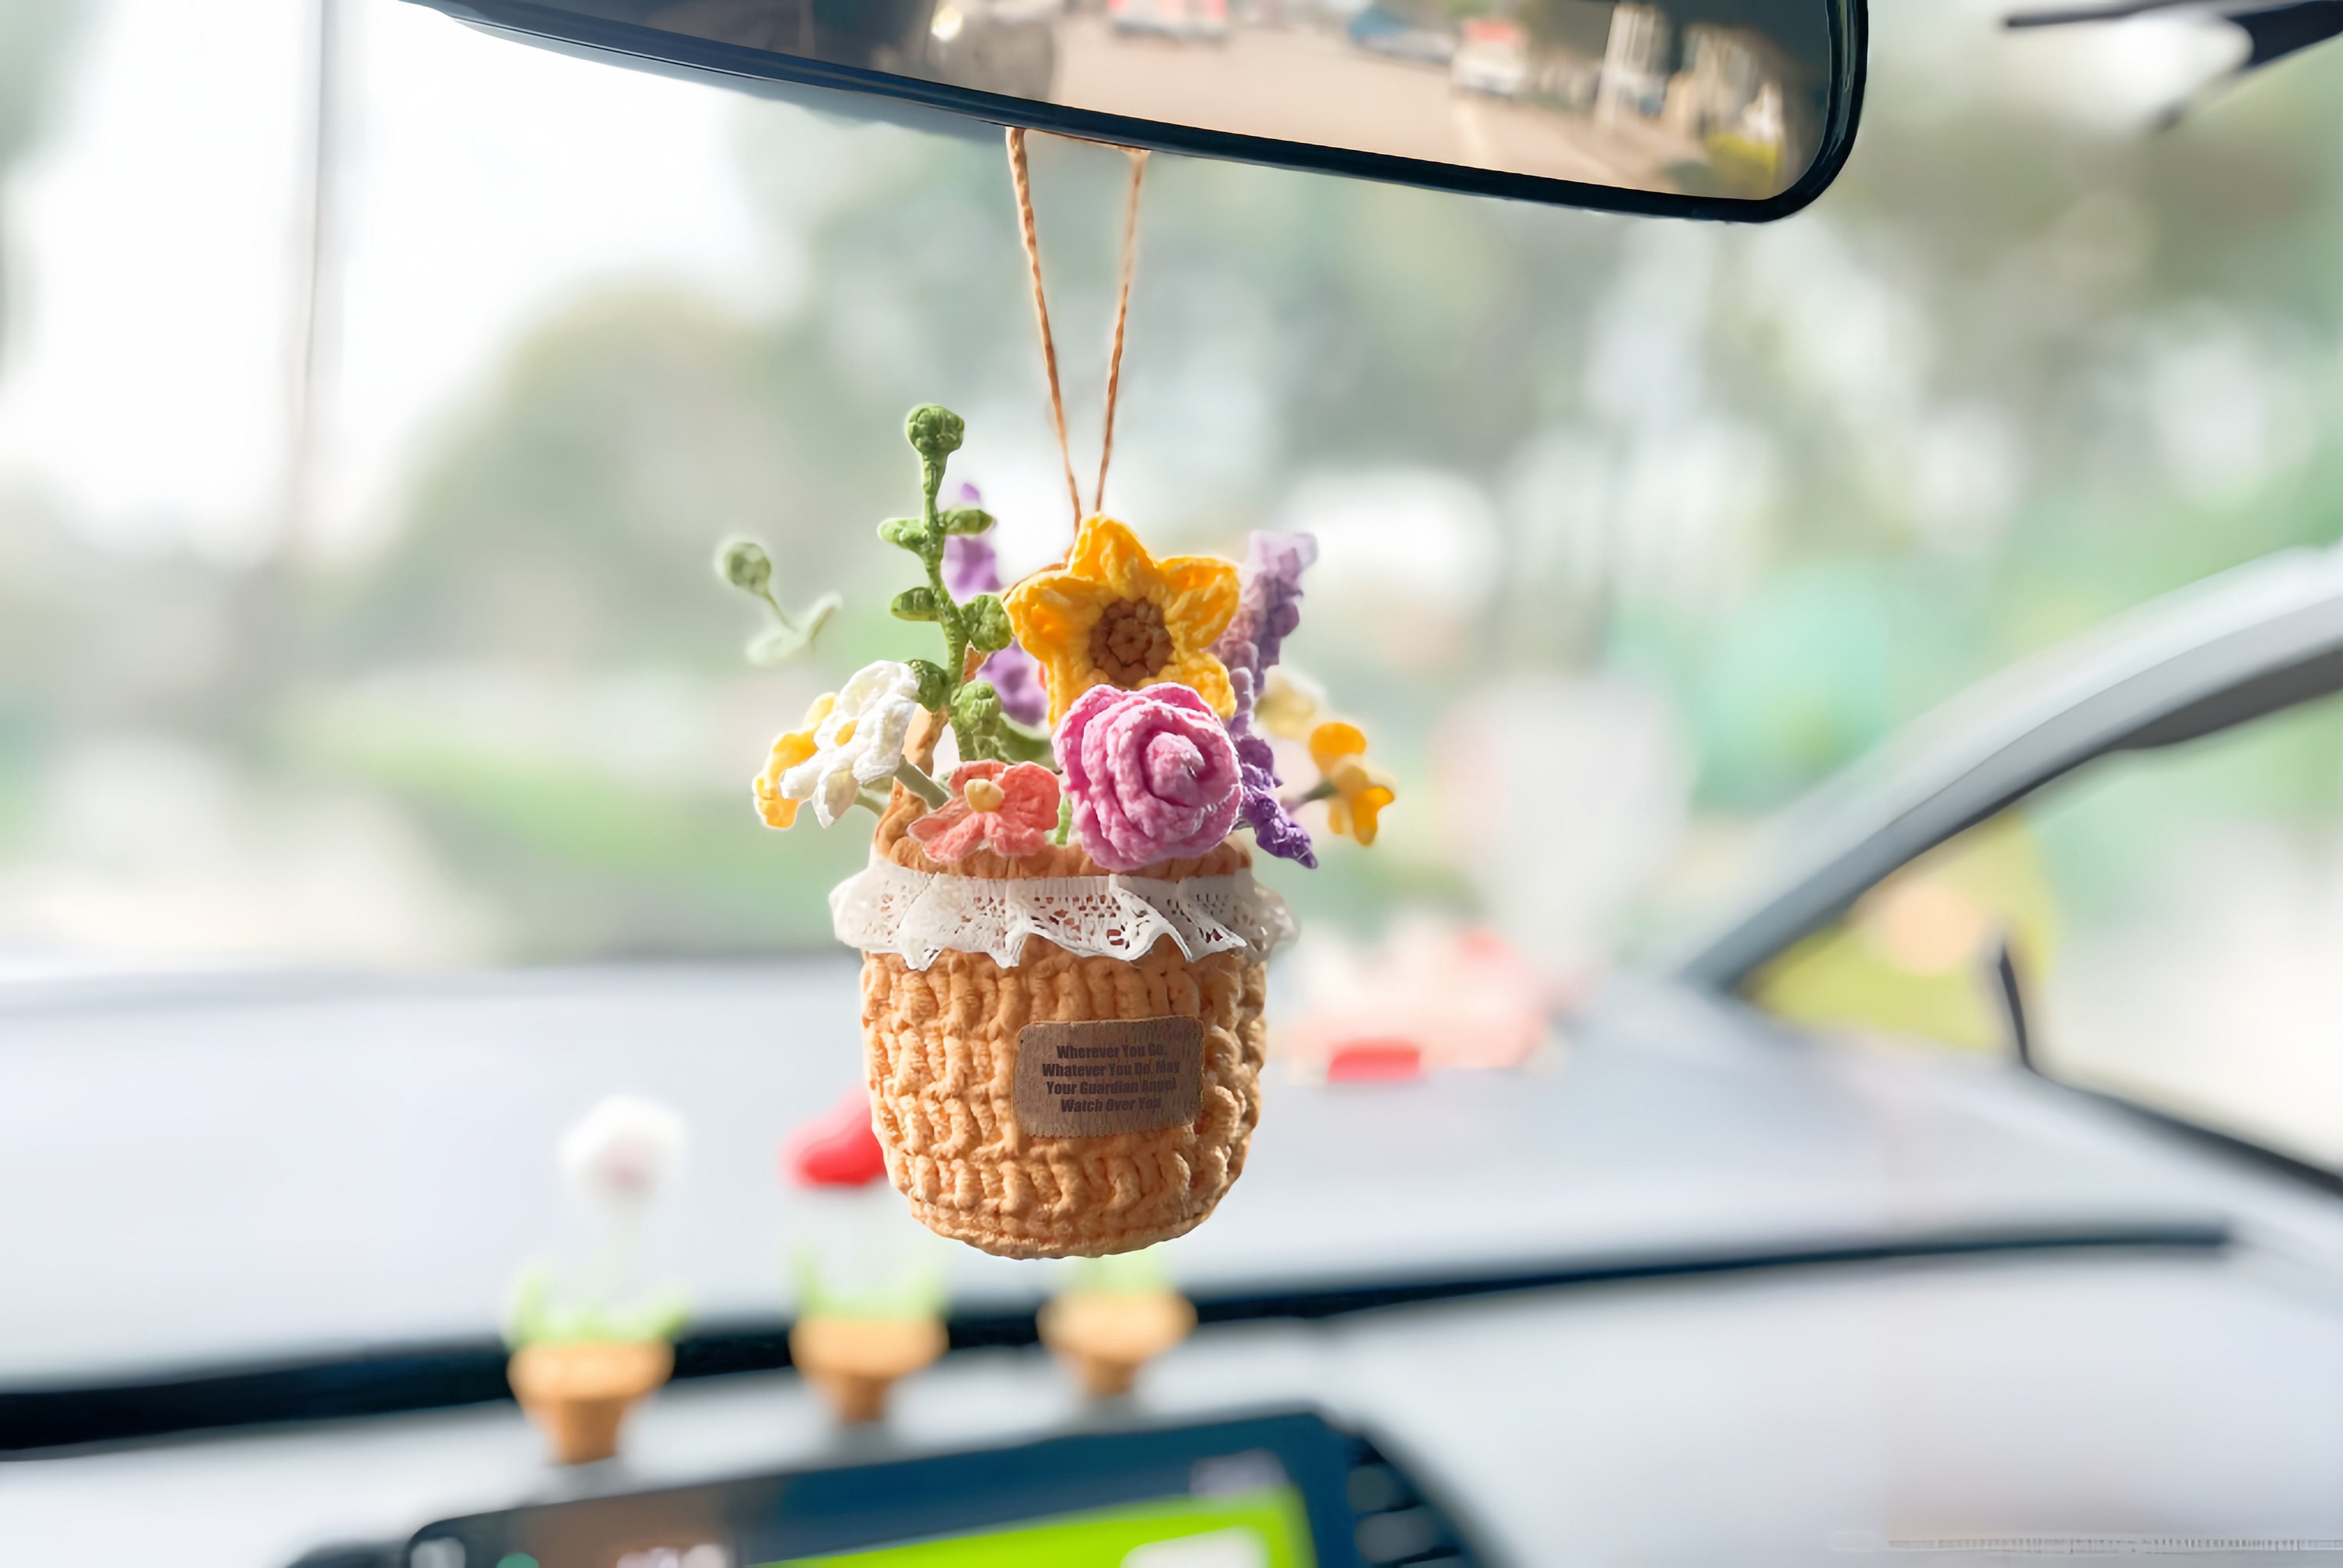 33 Groovy Rear View Mirror Accessories That'll Add Some Swinging Style To  Your Car Interior